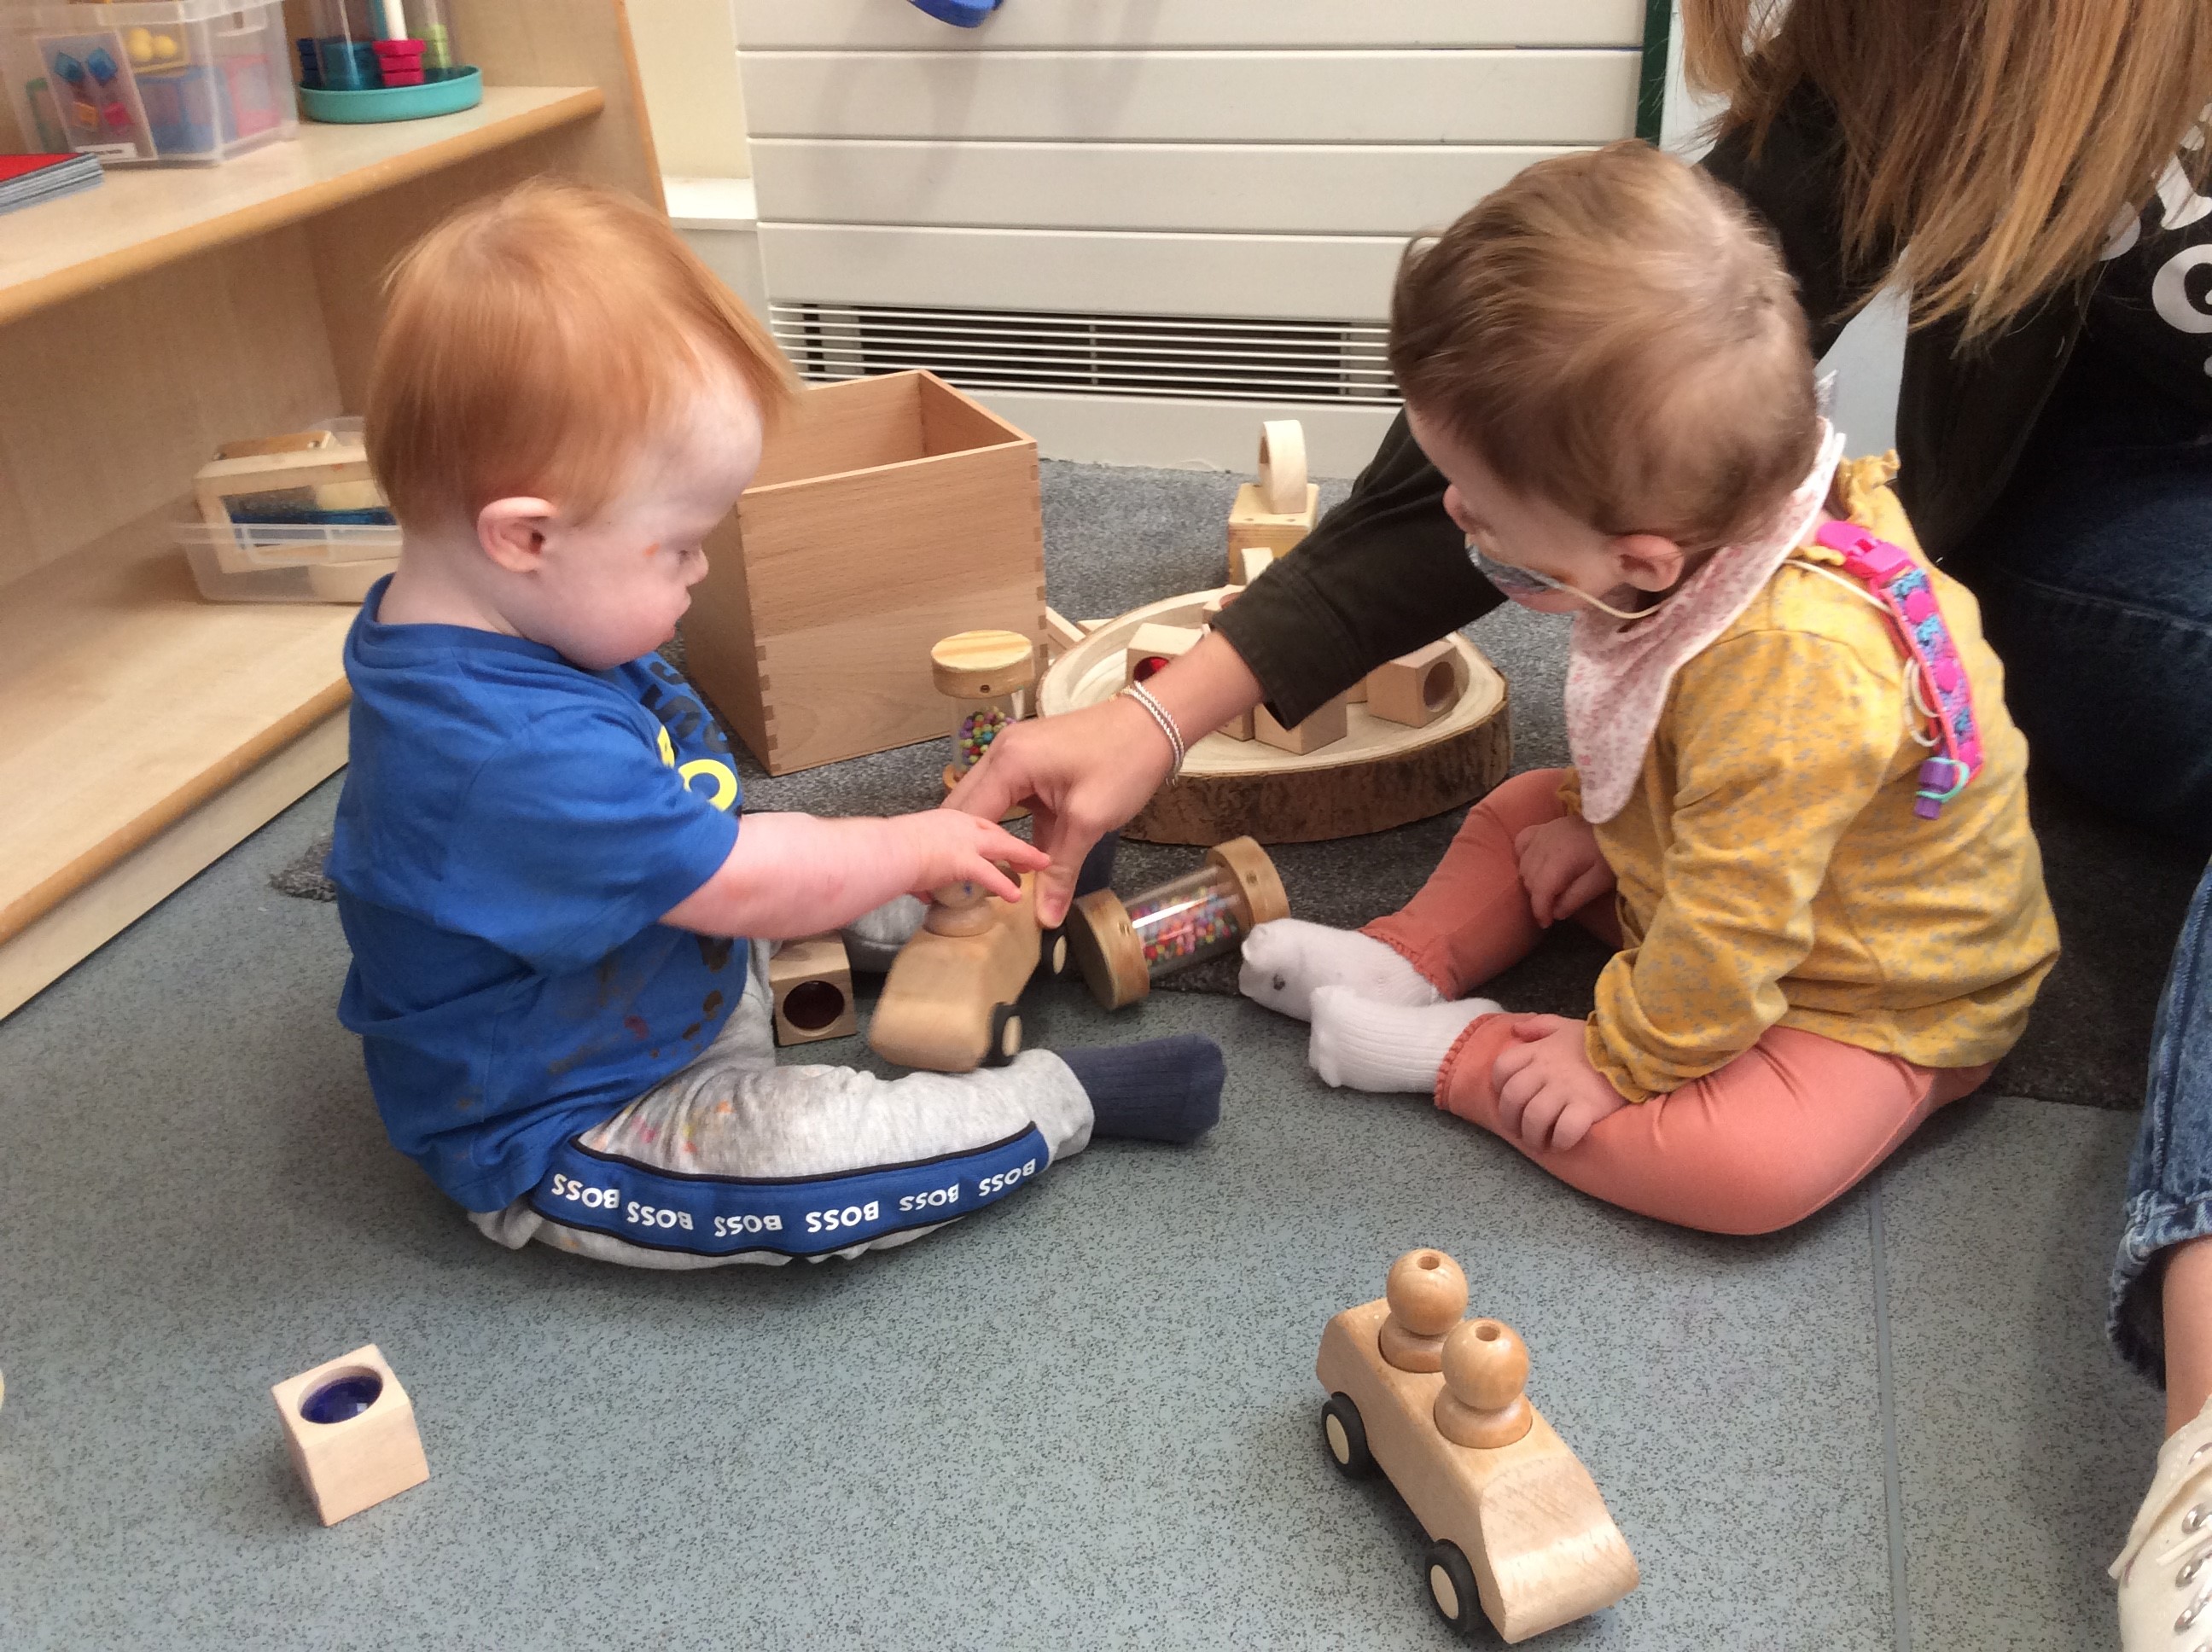 Two toddlers playing with wooden toys